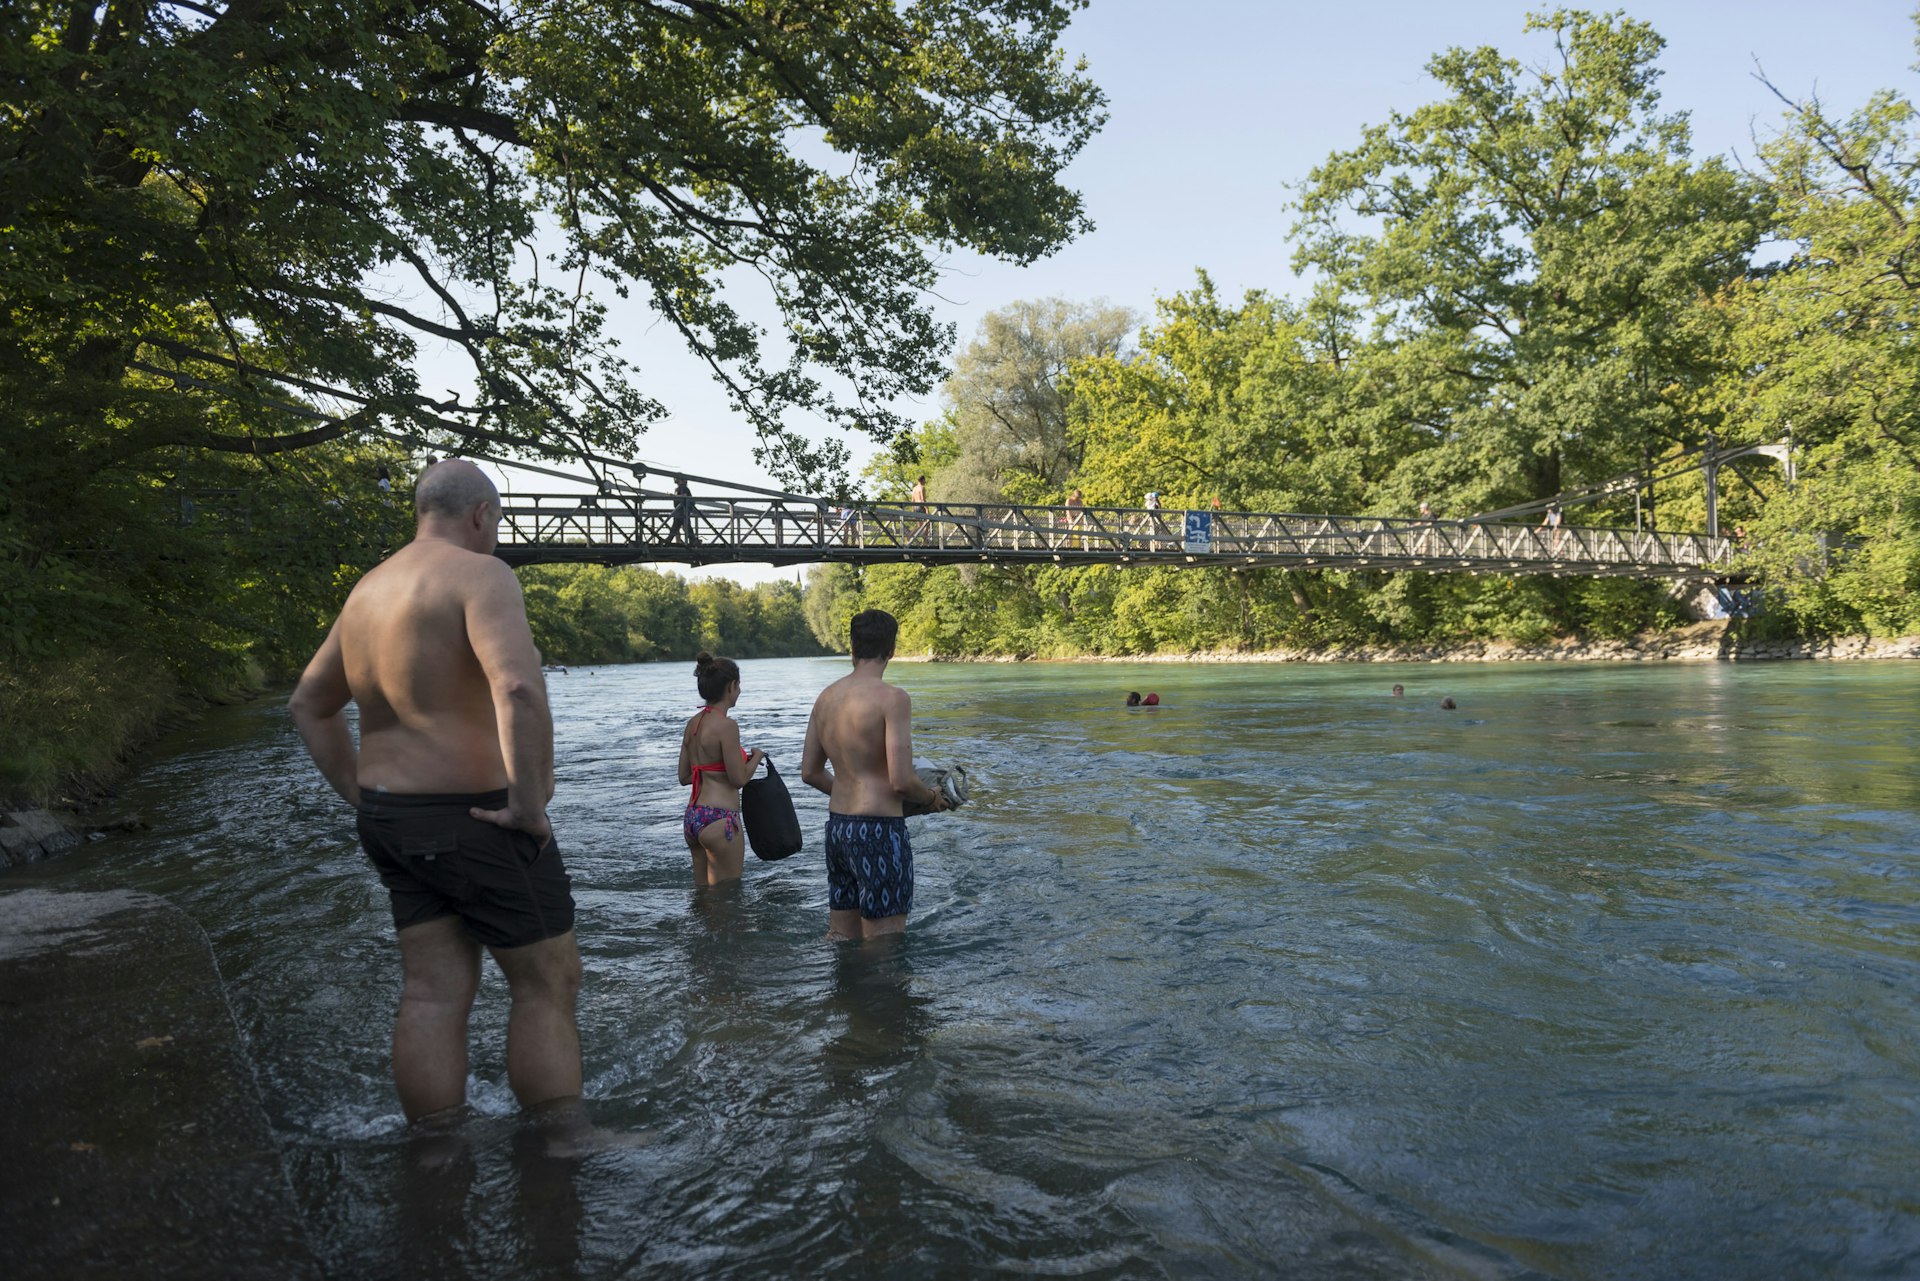 A group of people stand on the bank of a river and look towards a pedestrian bridge, underneath which people are swimming.